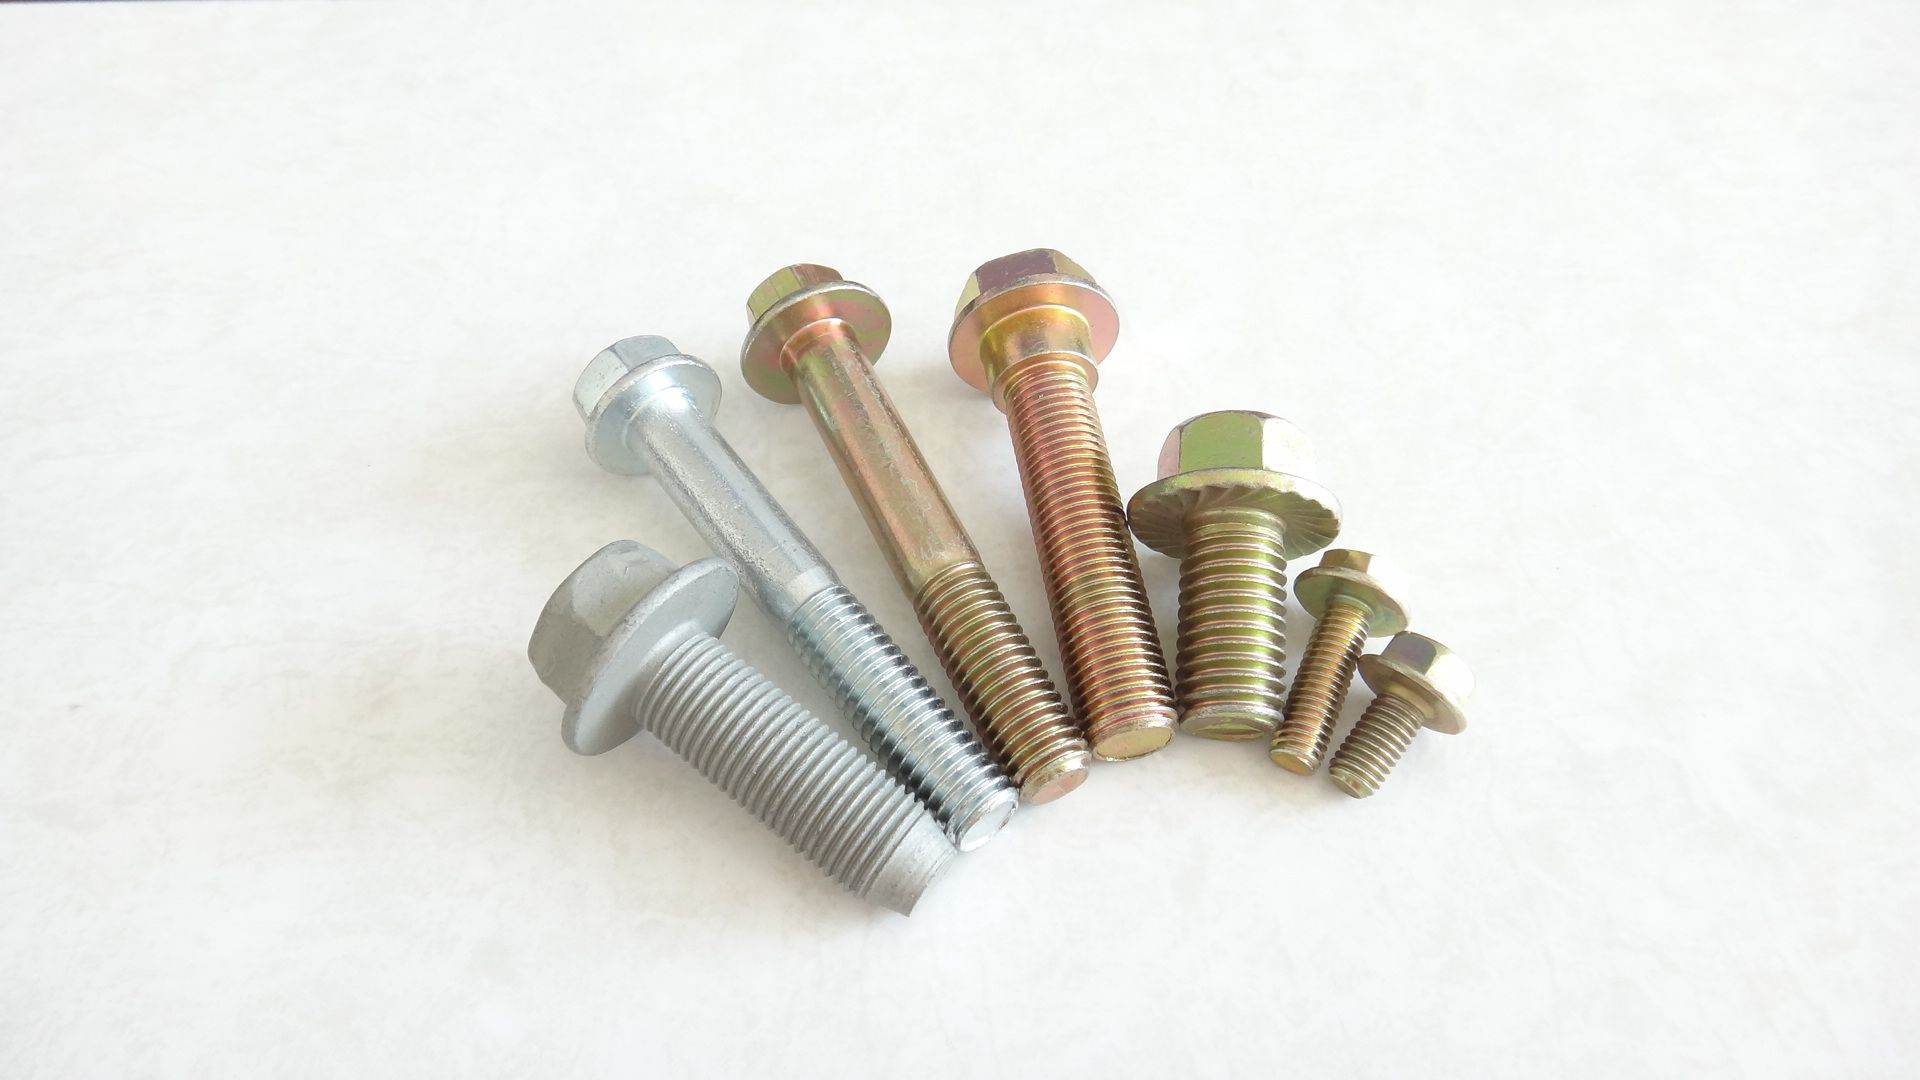 Two types of cleaners are commonly used for fasteners